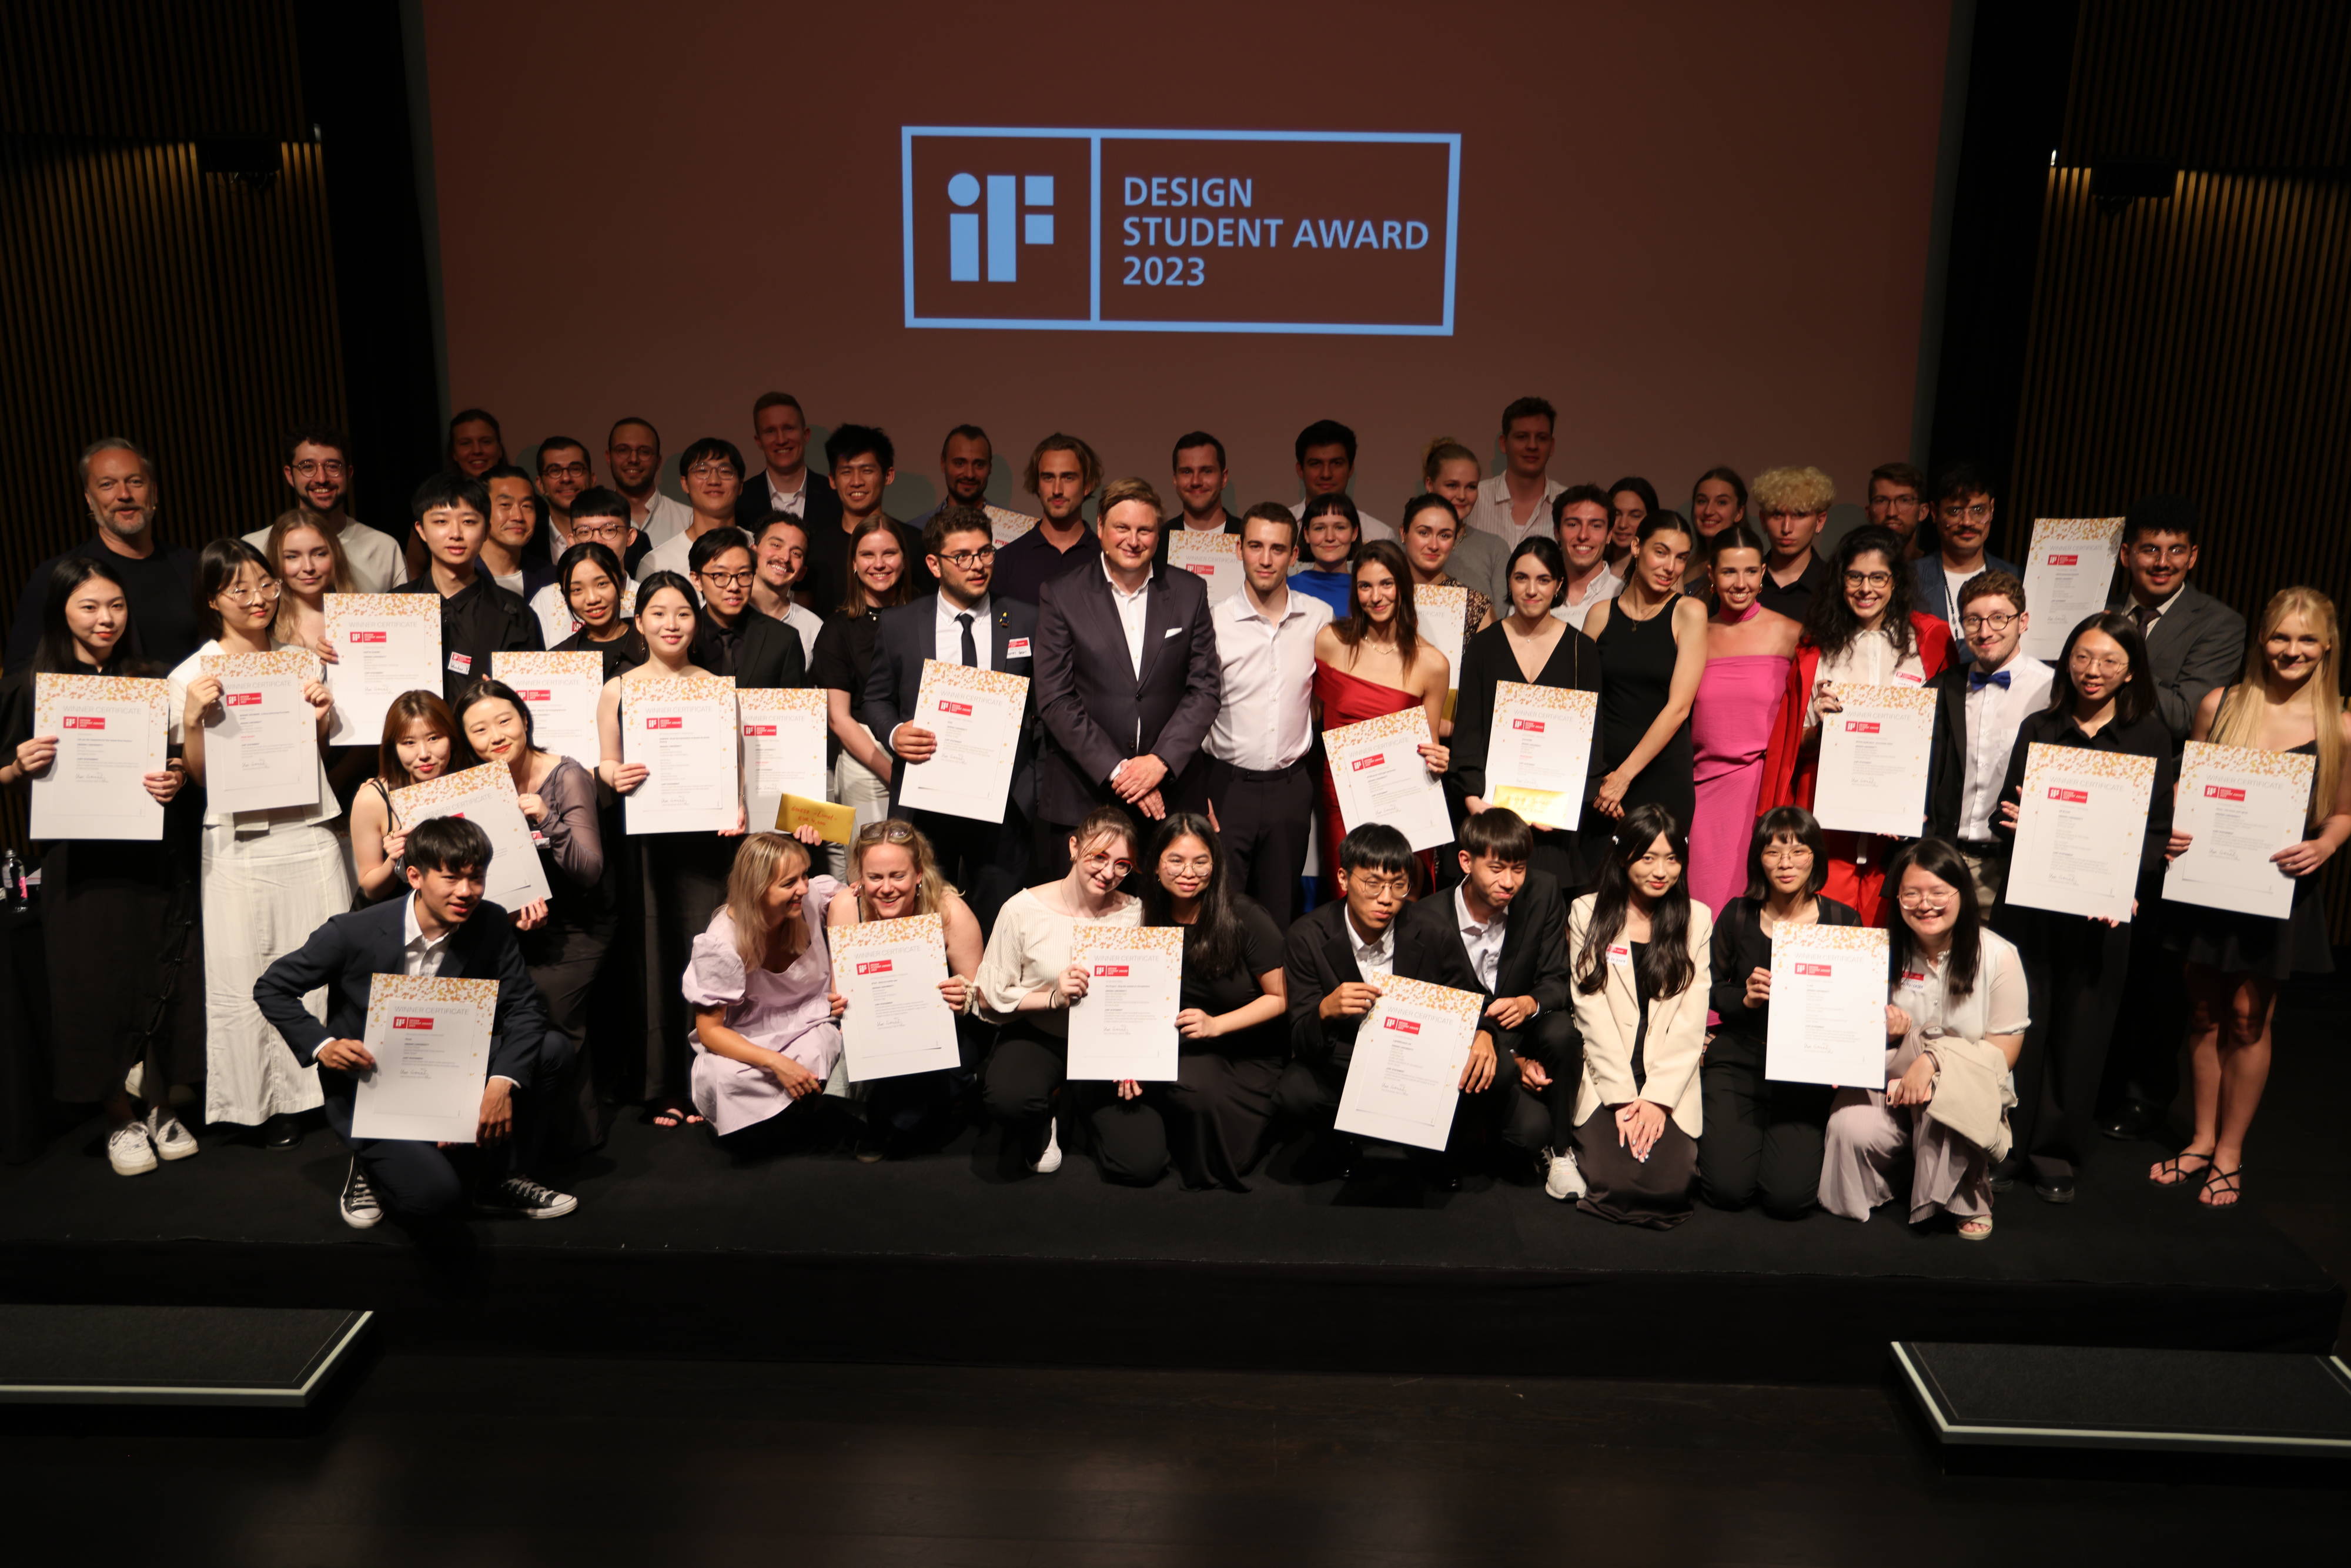 iF Design The winners of this year's iF Design Student Award have